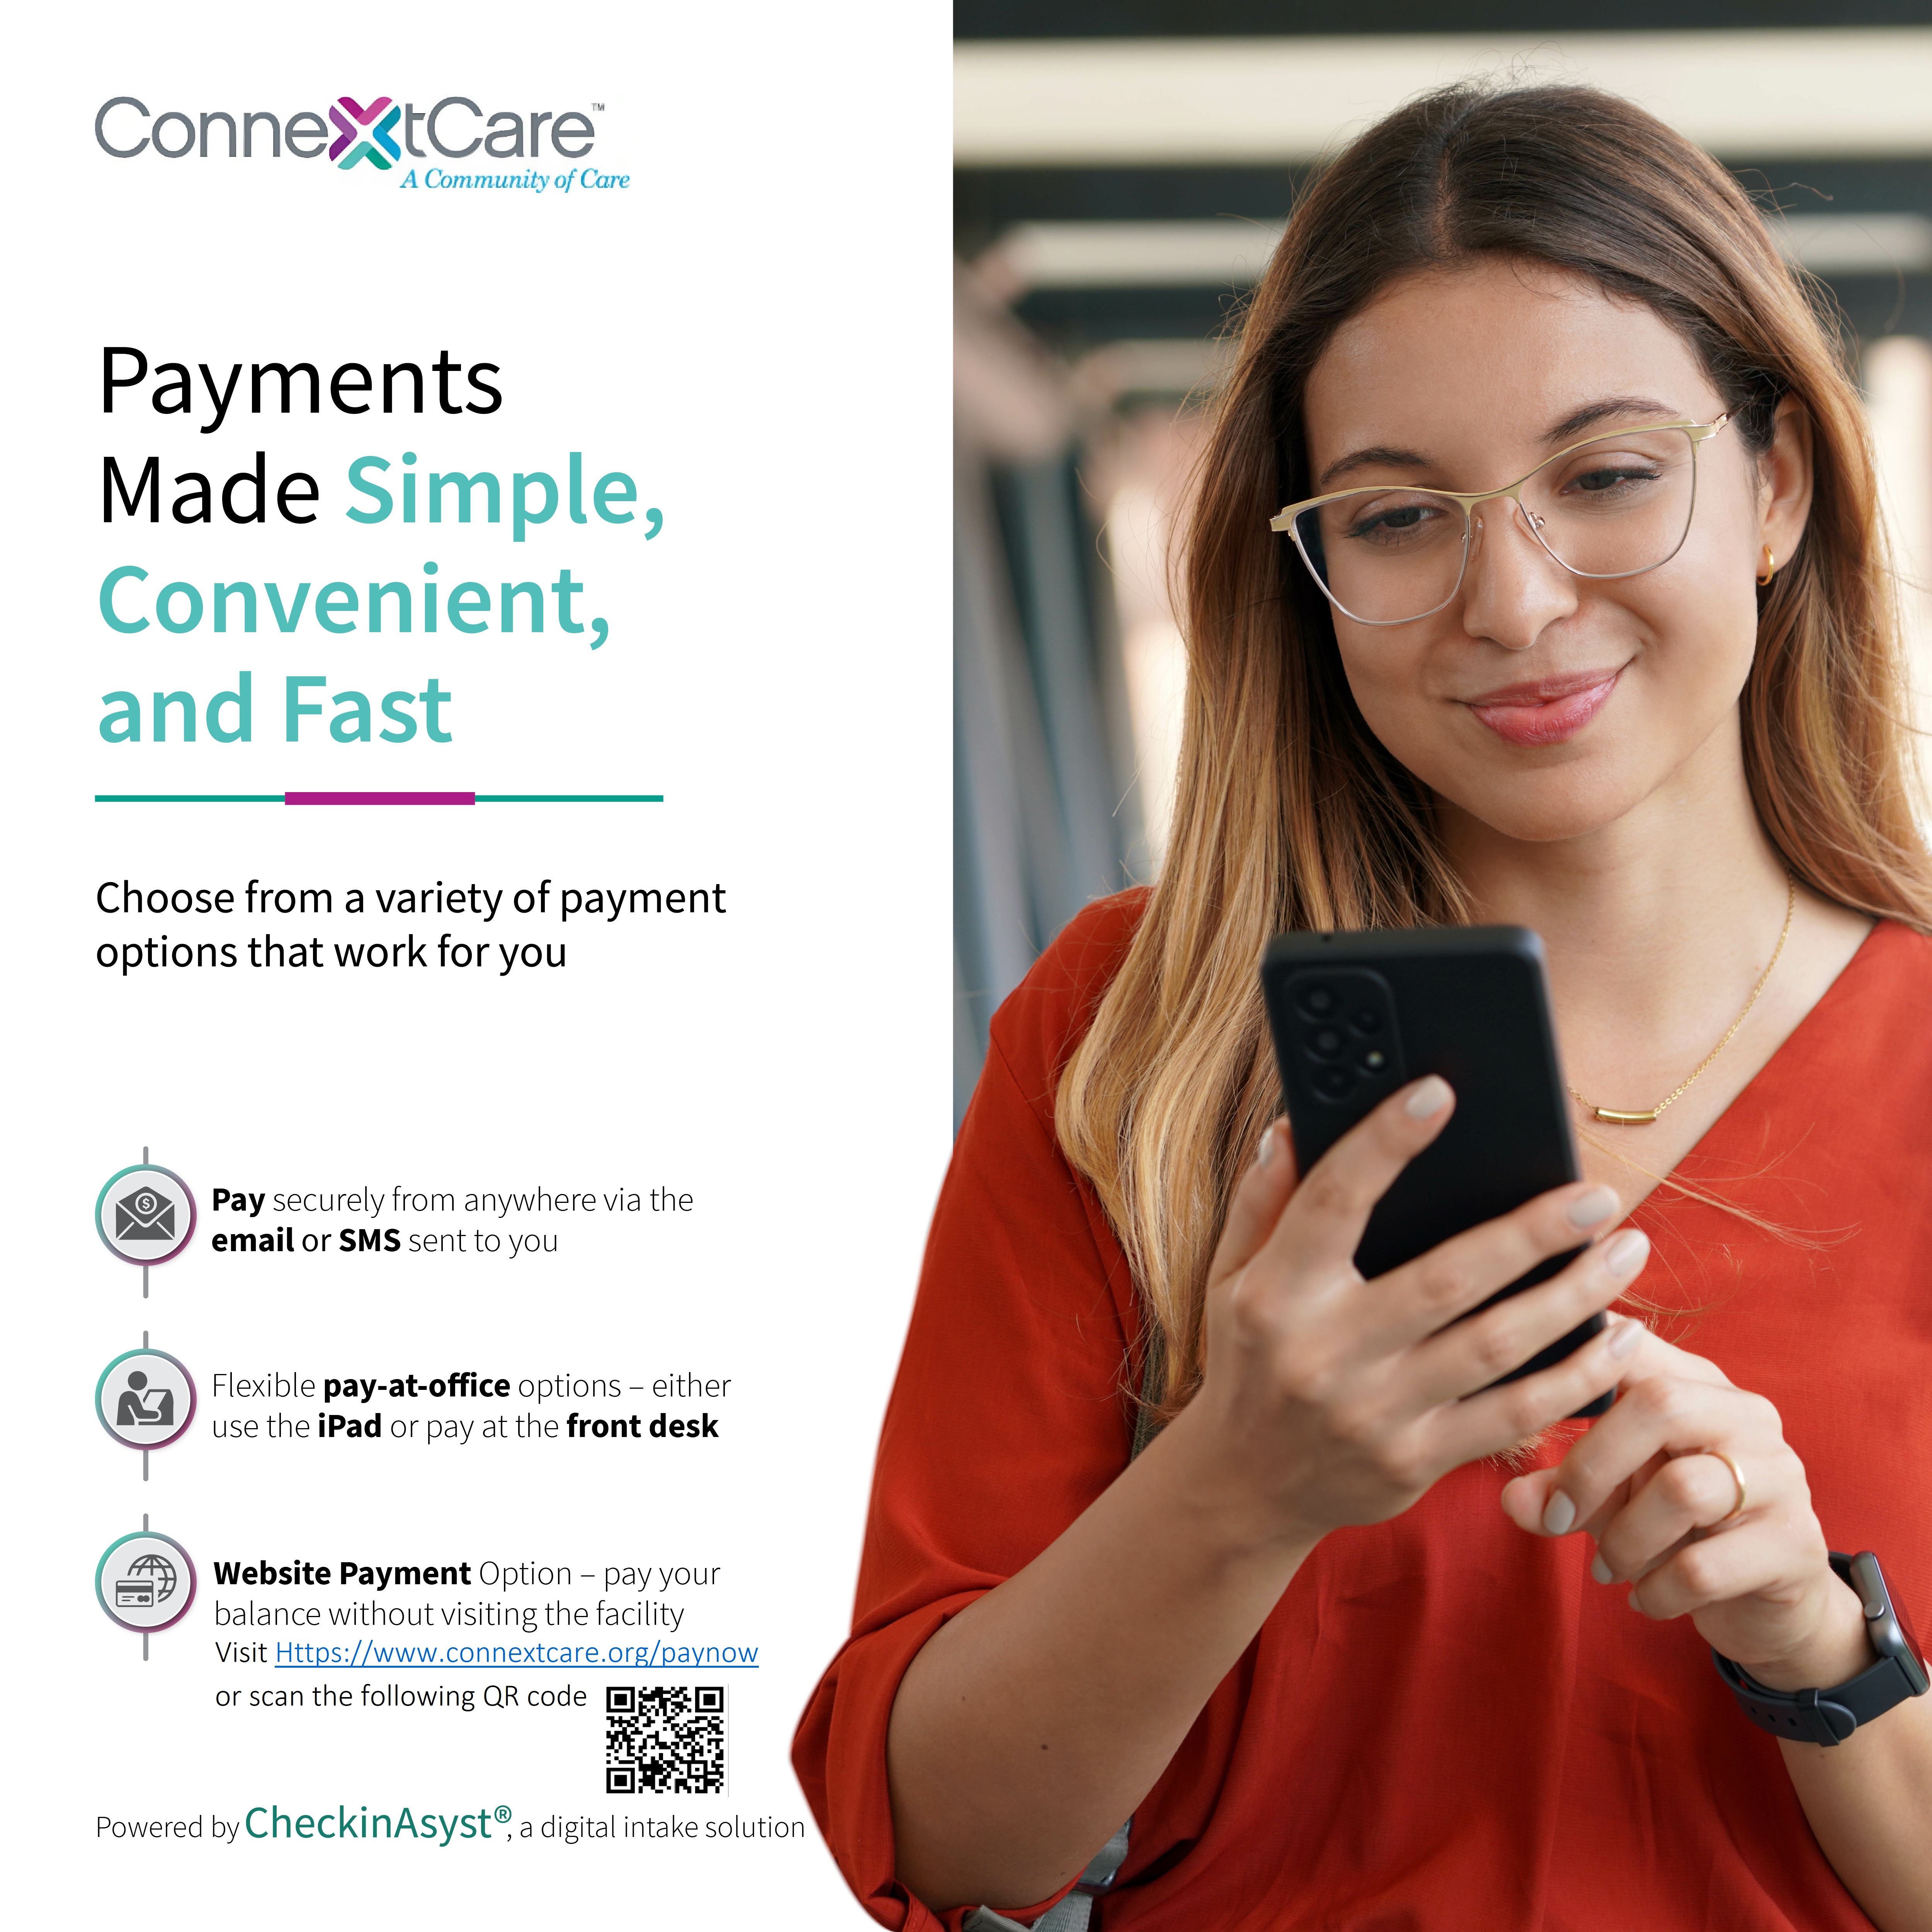 ConnextCare Launches New Platform For Easy Online Payment Options Image